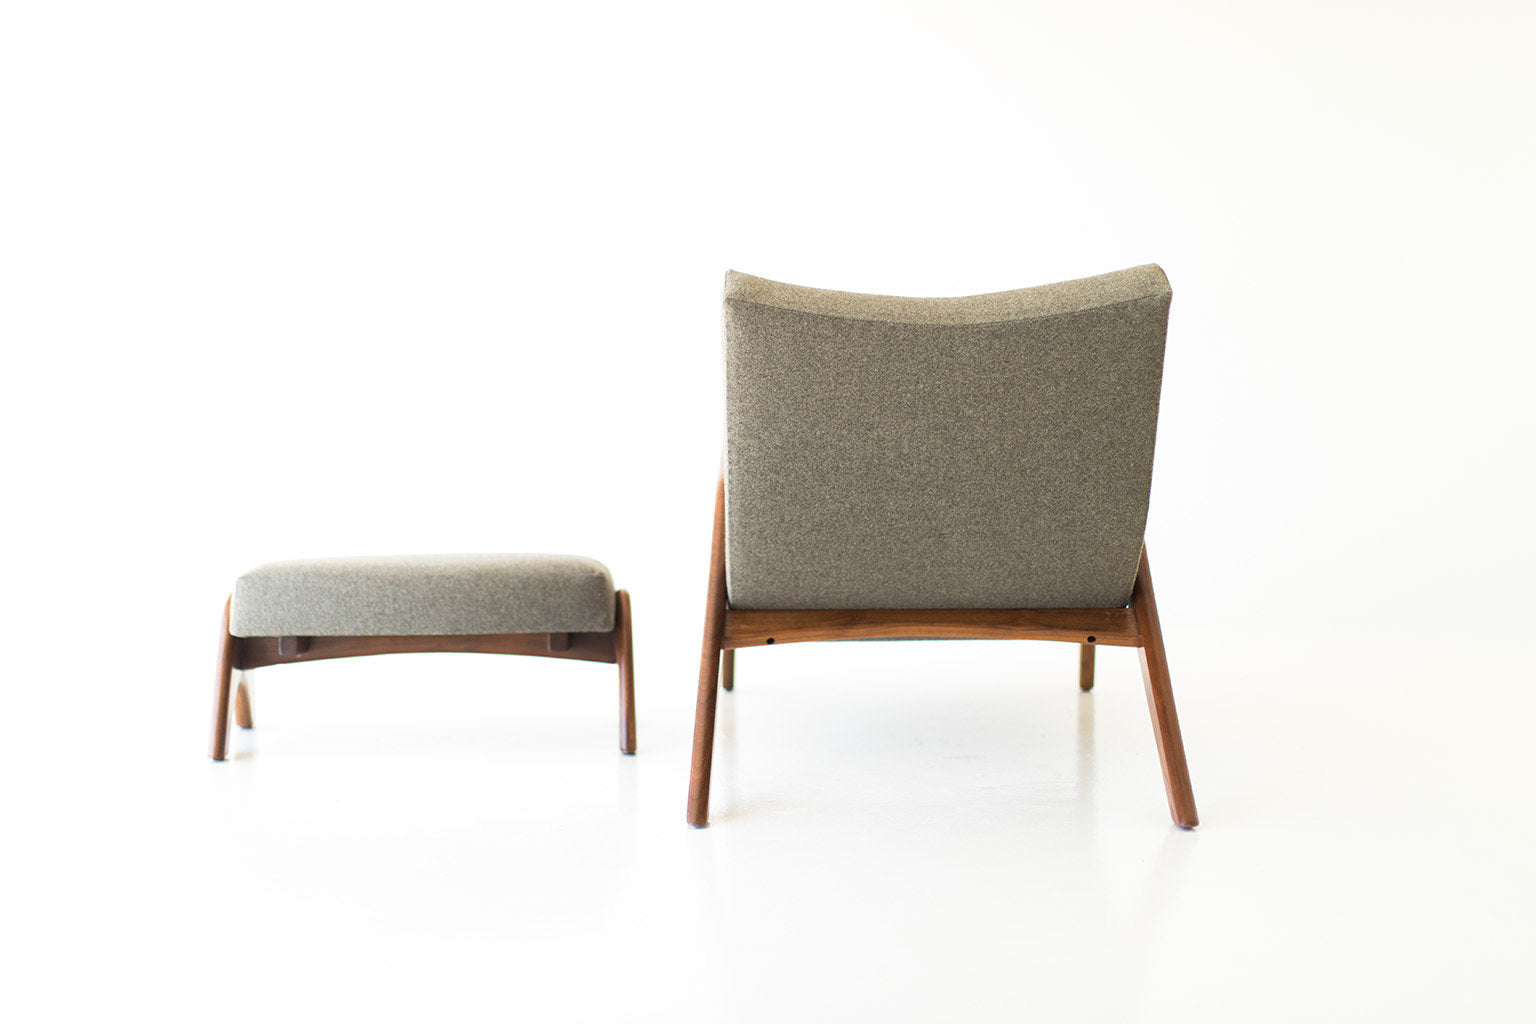 Adrian Pearsall Lounge Chair and Ottoman for Craft Associates Inc. - 05101802